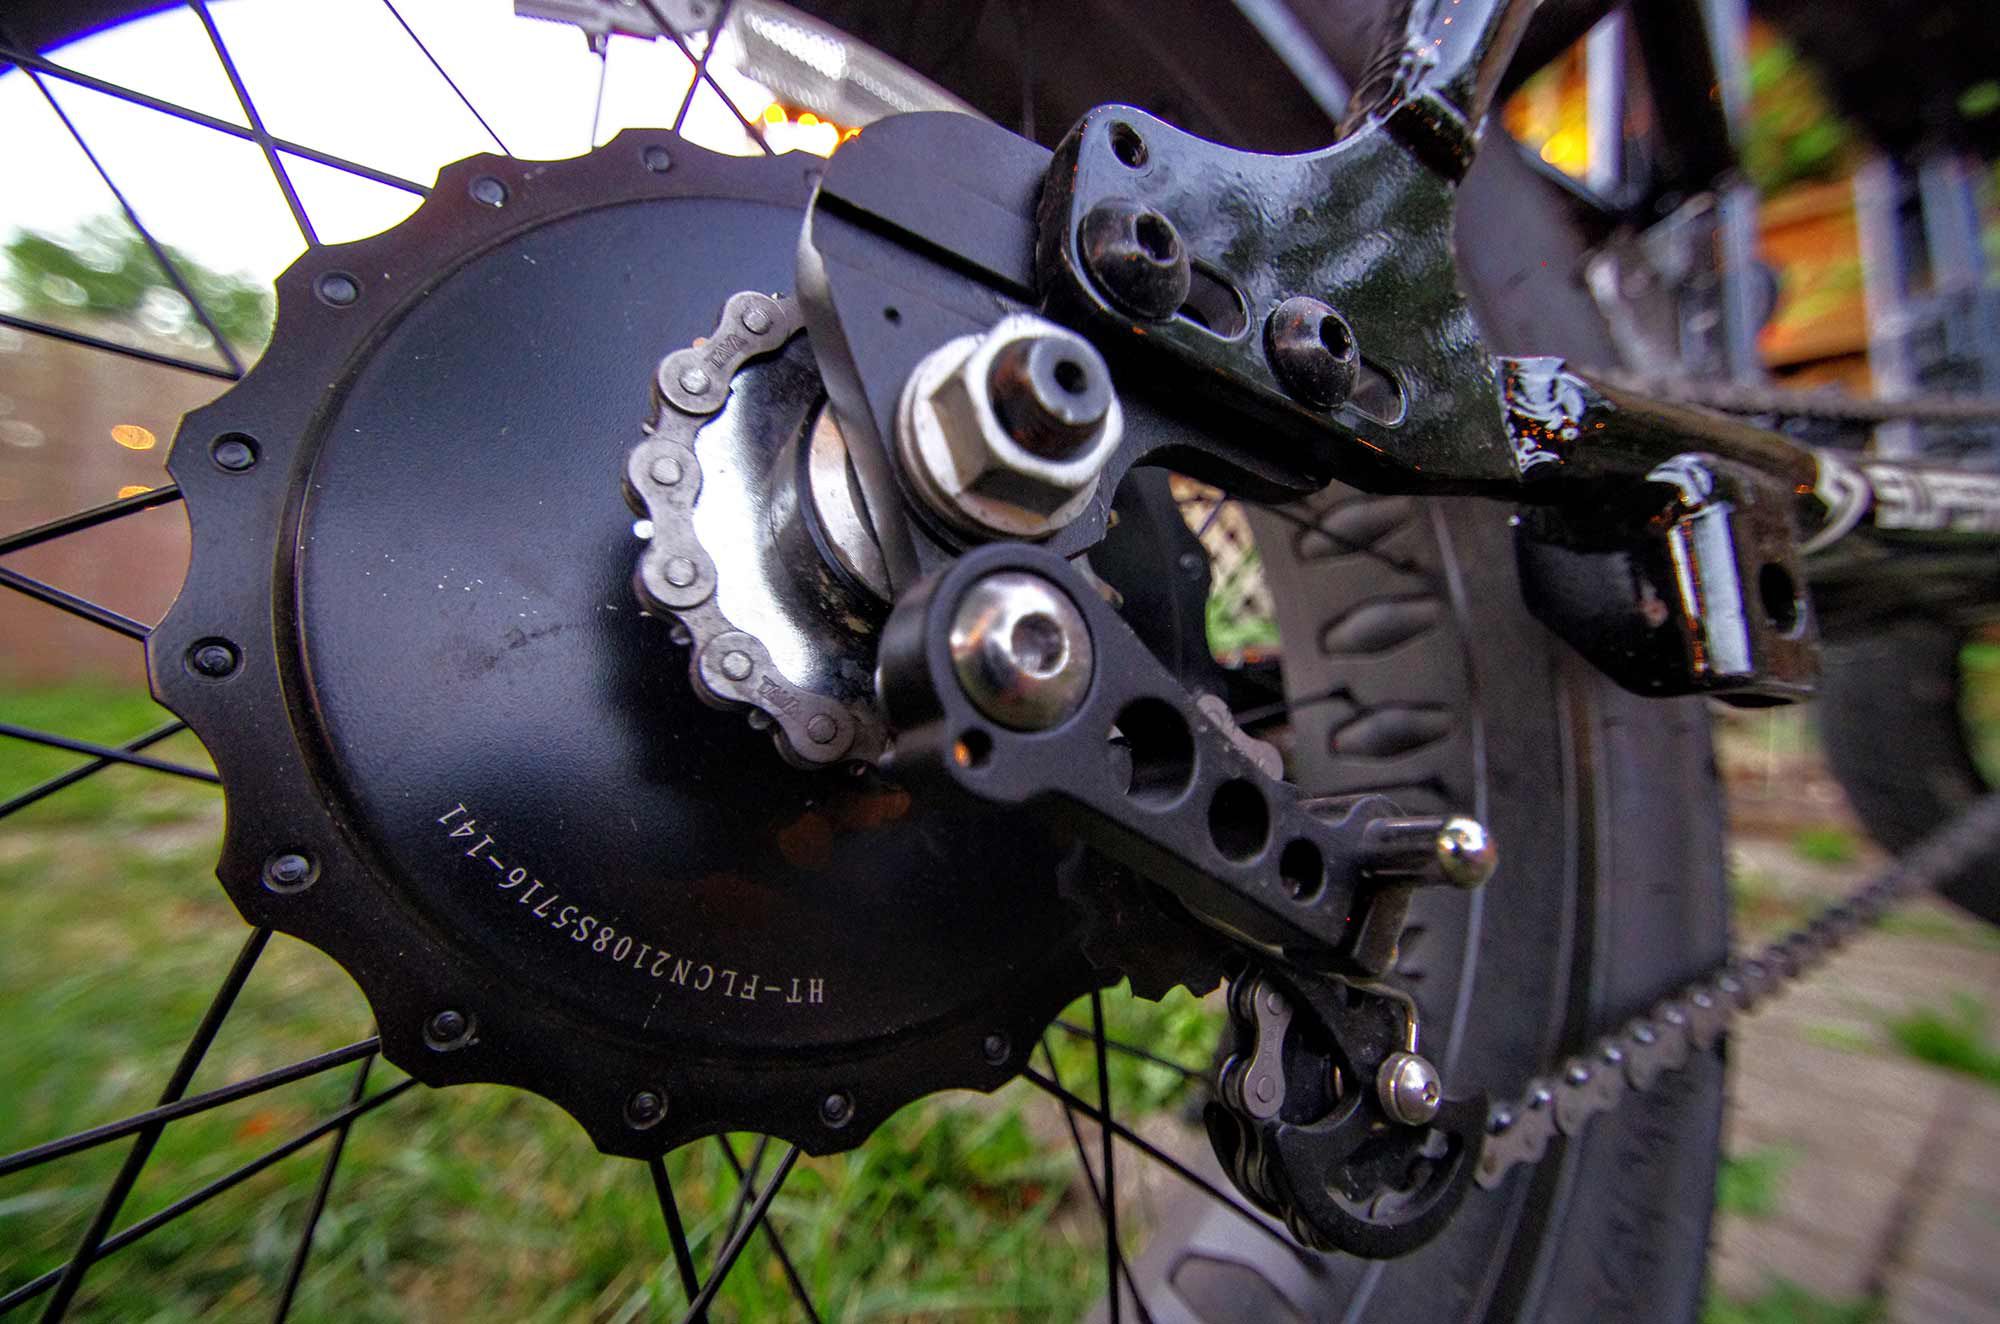 The 750W nominal power (2,000W peak power) hub-mounted motor works a 1/8-inch chain with tensioner.